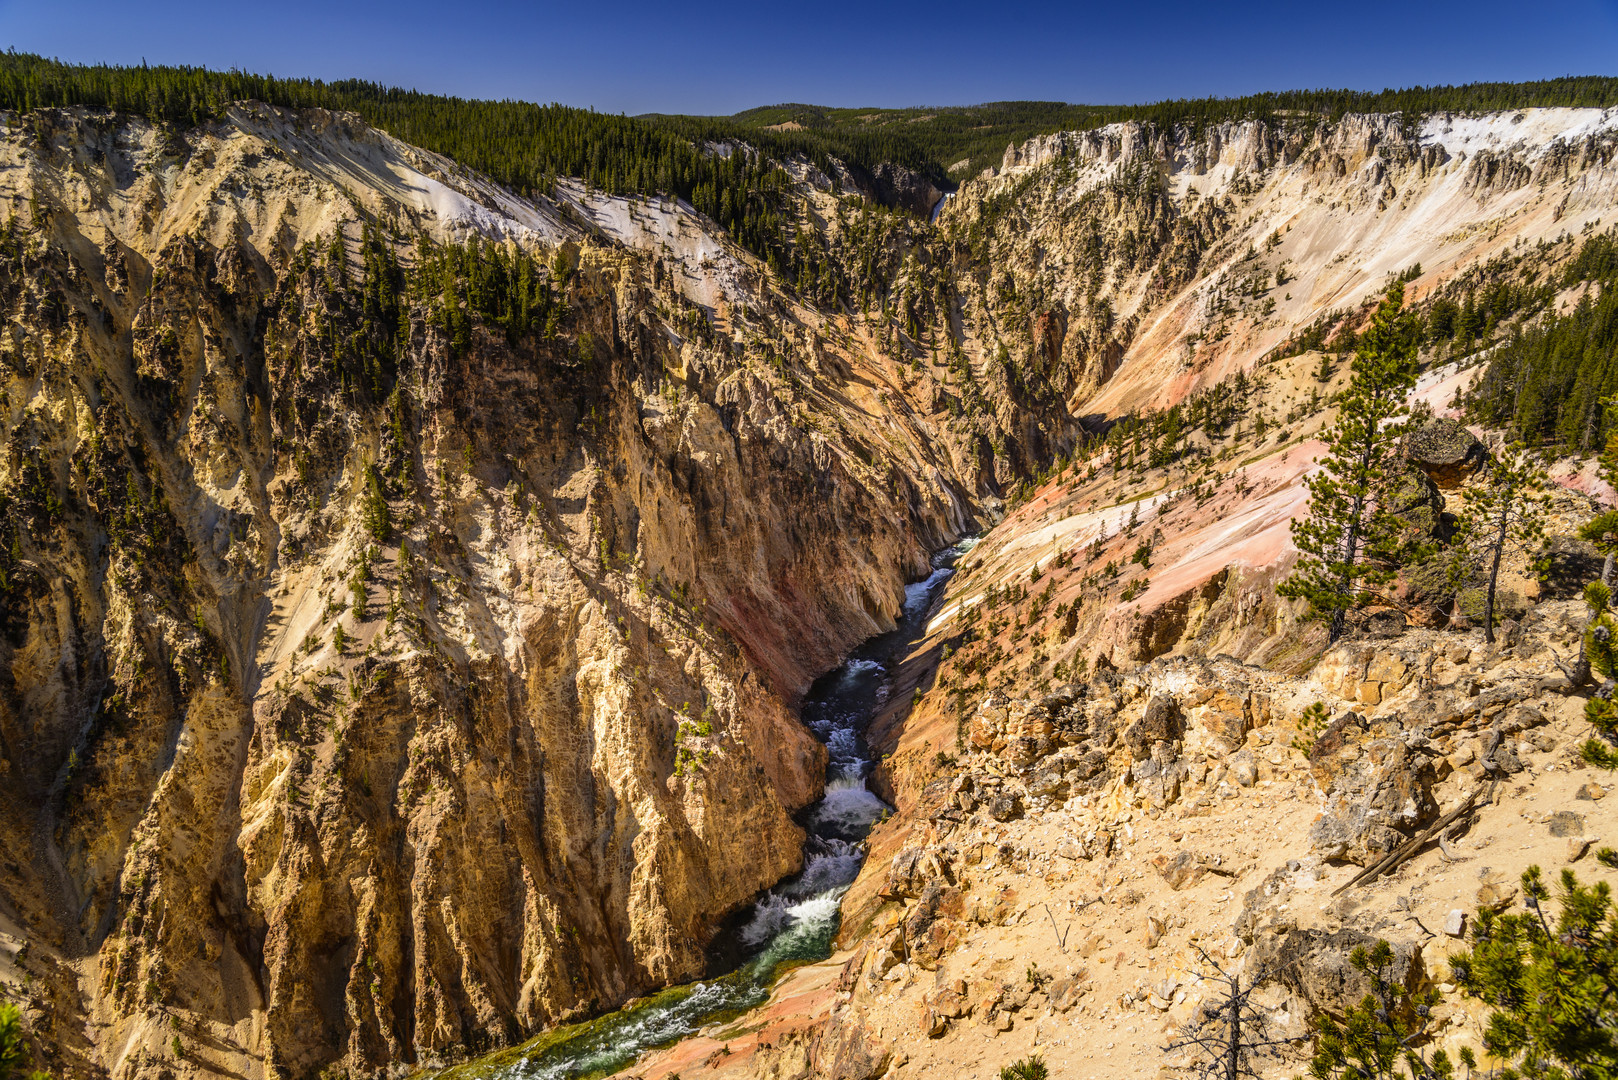  Grand Canyon of the Yellowstone, Inspiration Point, Wyoming, USA